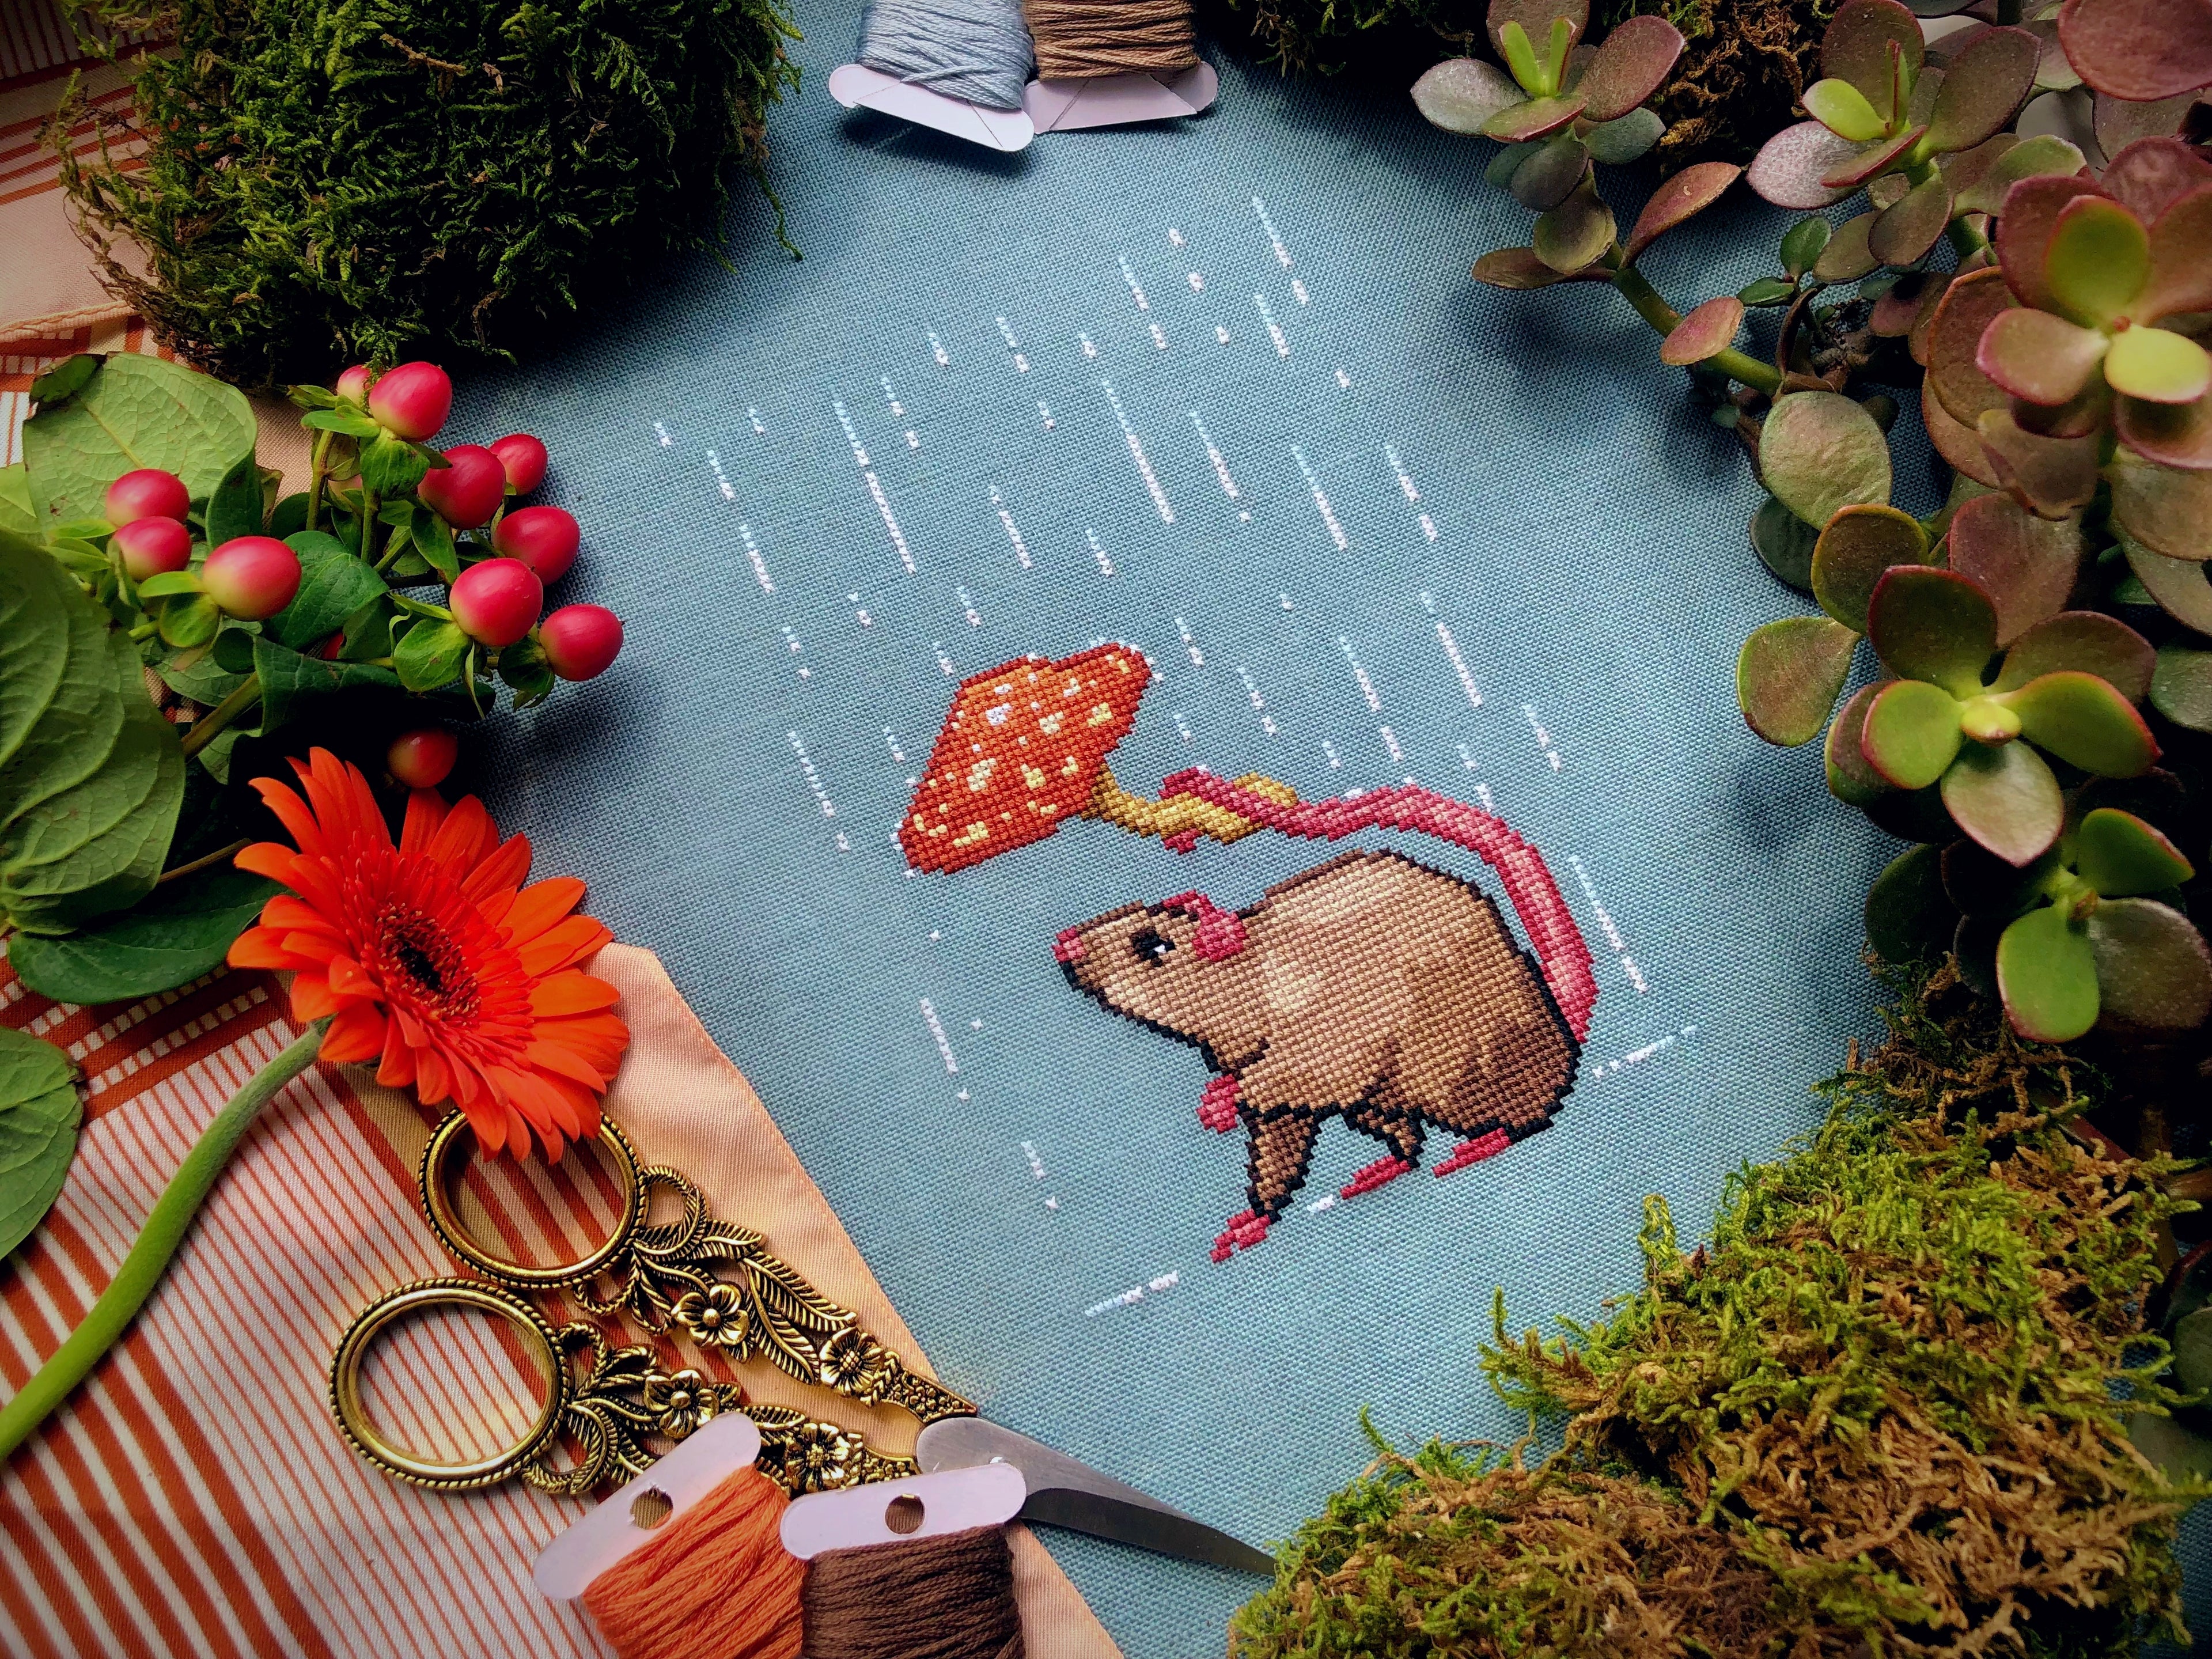 Topdown image of Rainy days rat cross stitch pattern. Fabric is turqois-blue, rat is brown with a pink tail. He is holding a mushroom over his head. His head is tilted upwards. His little paw is in the air. The mushroom keeps the rain out of his face